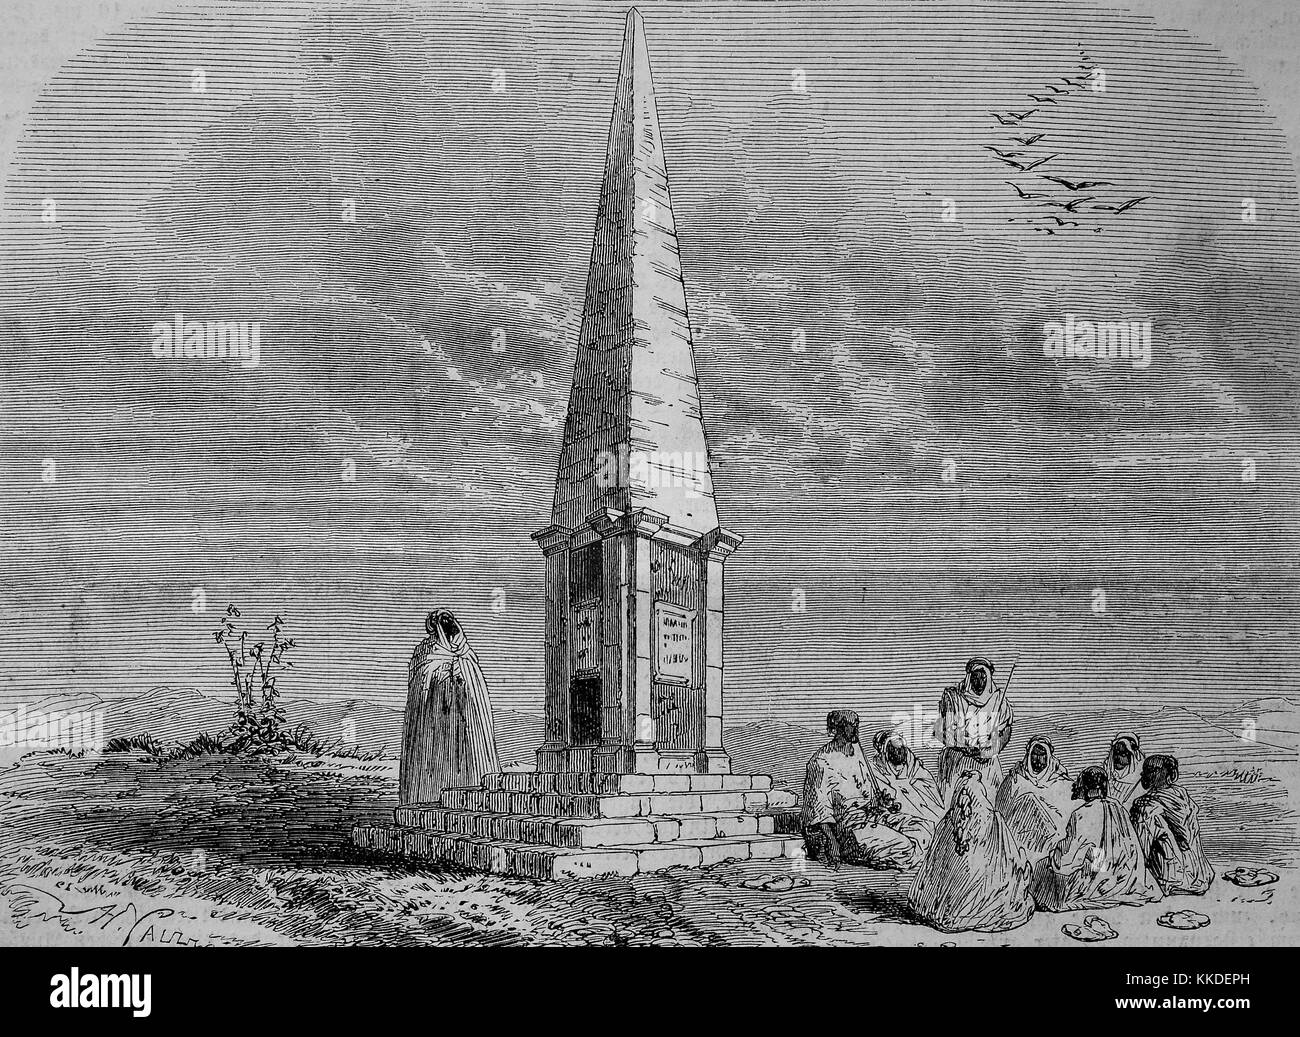 Memorial of the Battle of Sidi Brahim was a battle at Sidi Brahim in French Algeria between the troops of Abdelkader El Djezairi and French troops under Lieutenant-Colonel Lucien de Montagnac from 22 to 25 September 1845, Pictures of the time of 1845, Digital improved reproduction of an original woodcut Stock Photo